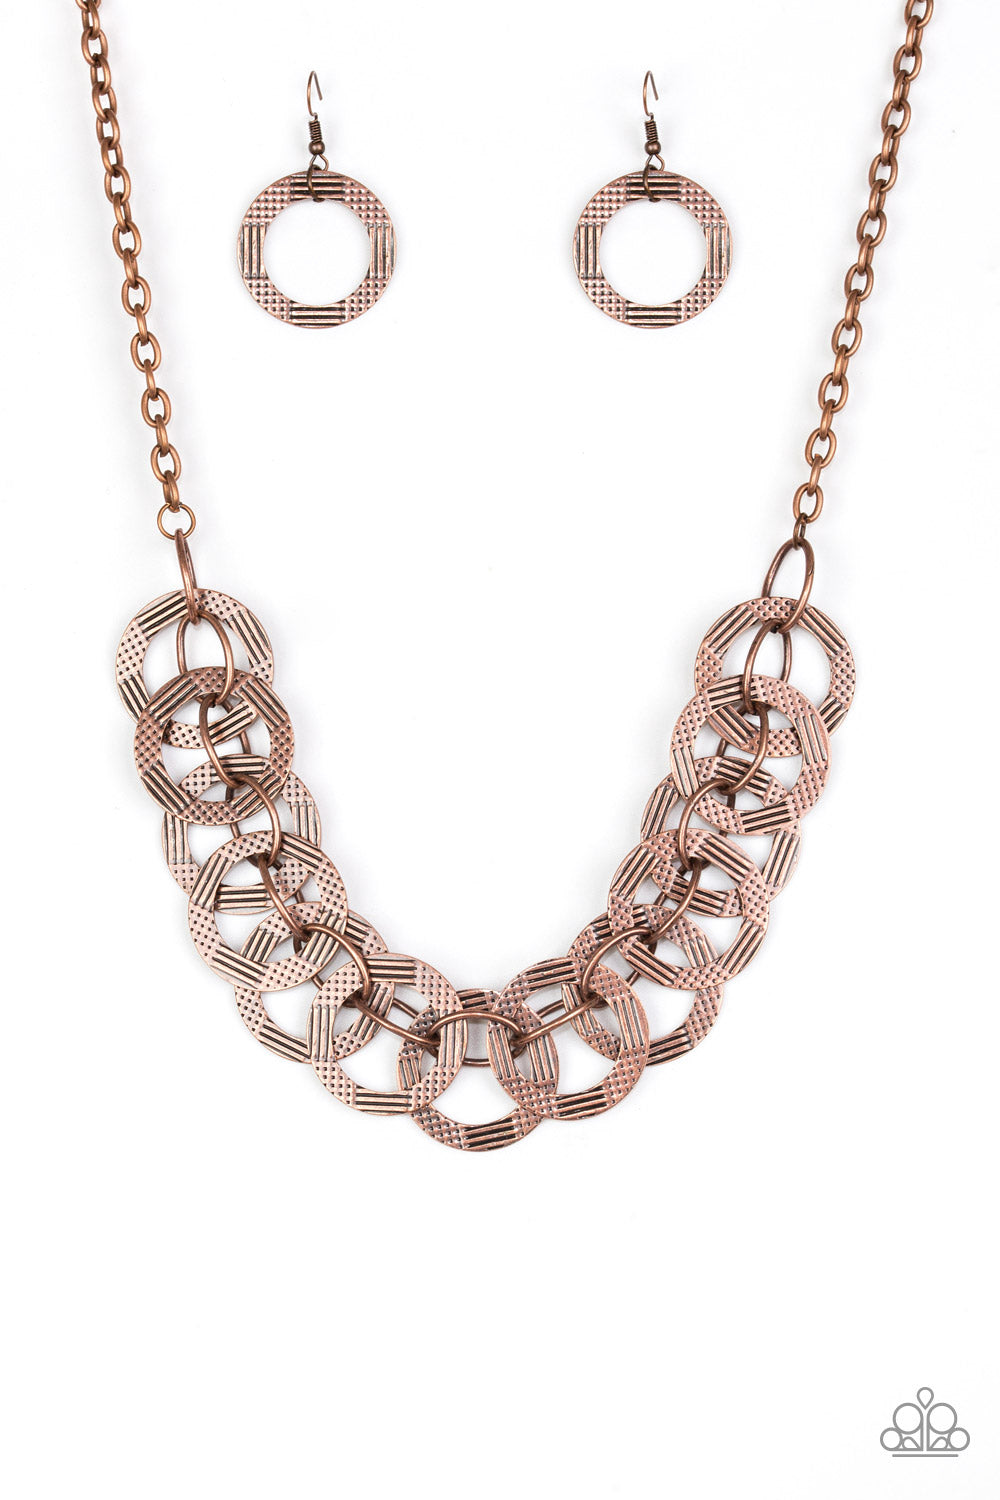 The Main Contender Copper Paparazzi Necklace Cashmere Pink Jewels - Cashmere Pink Jewels & Accessories, Cashmere Pink Jewels & Accessories - Paparazzi